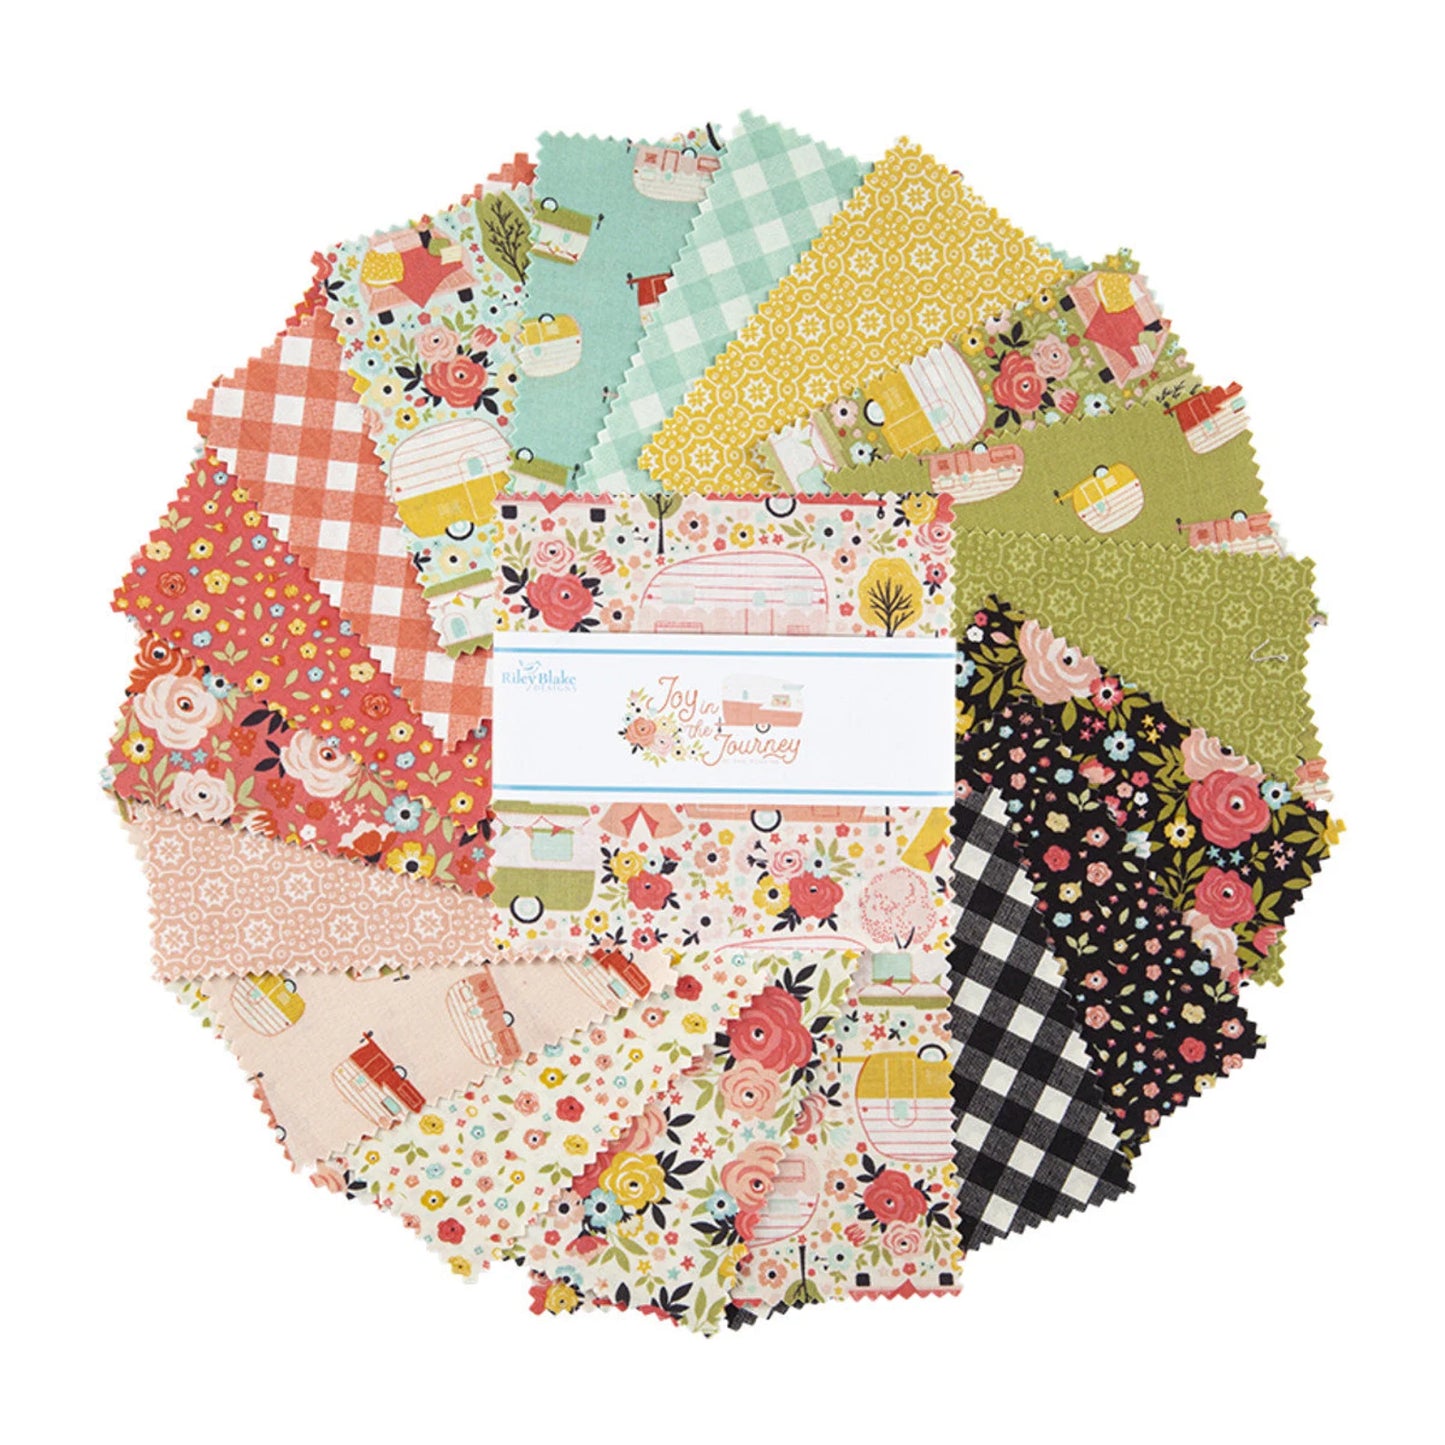 Joy in the Journey 5" charm pack fabric